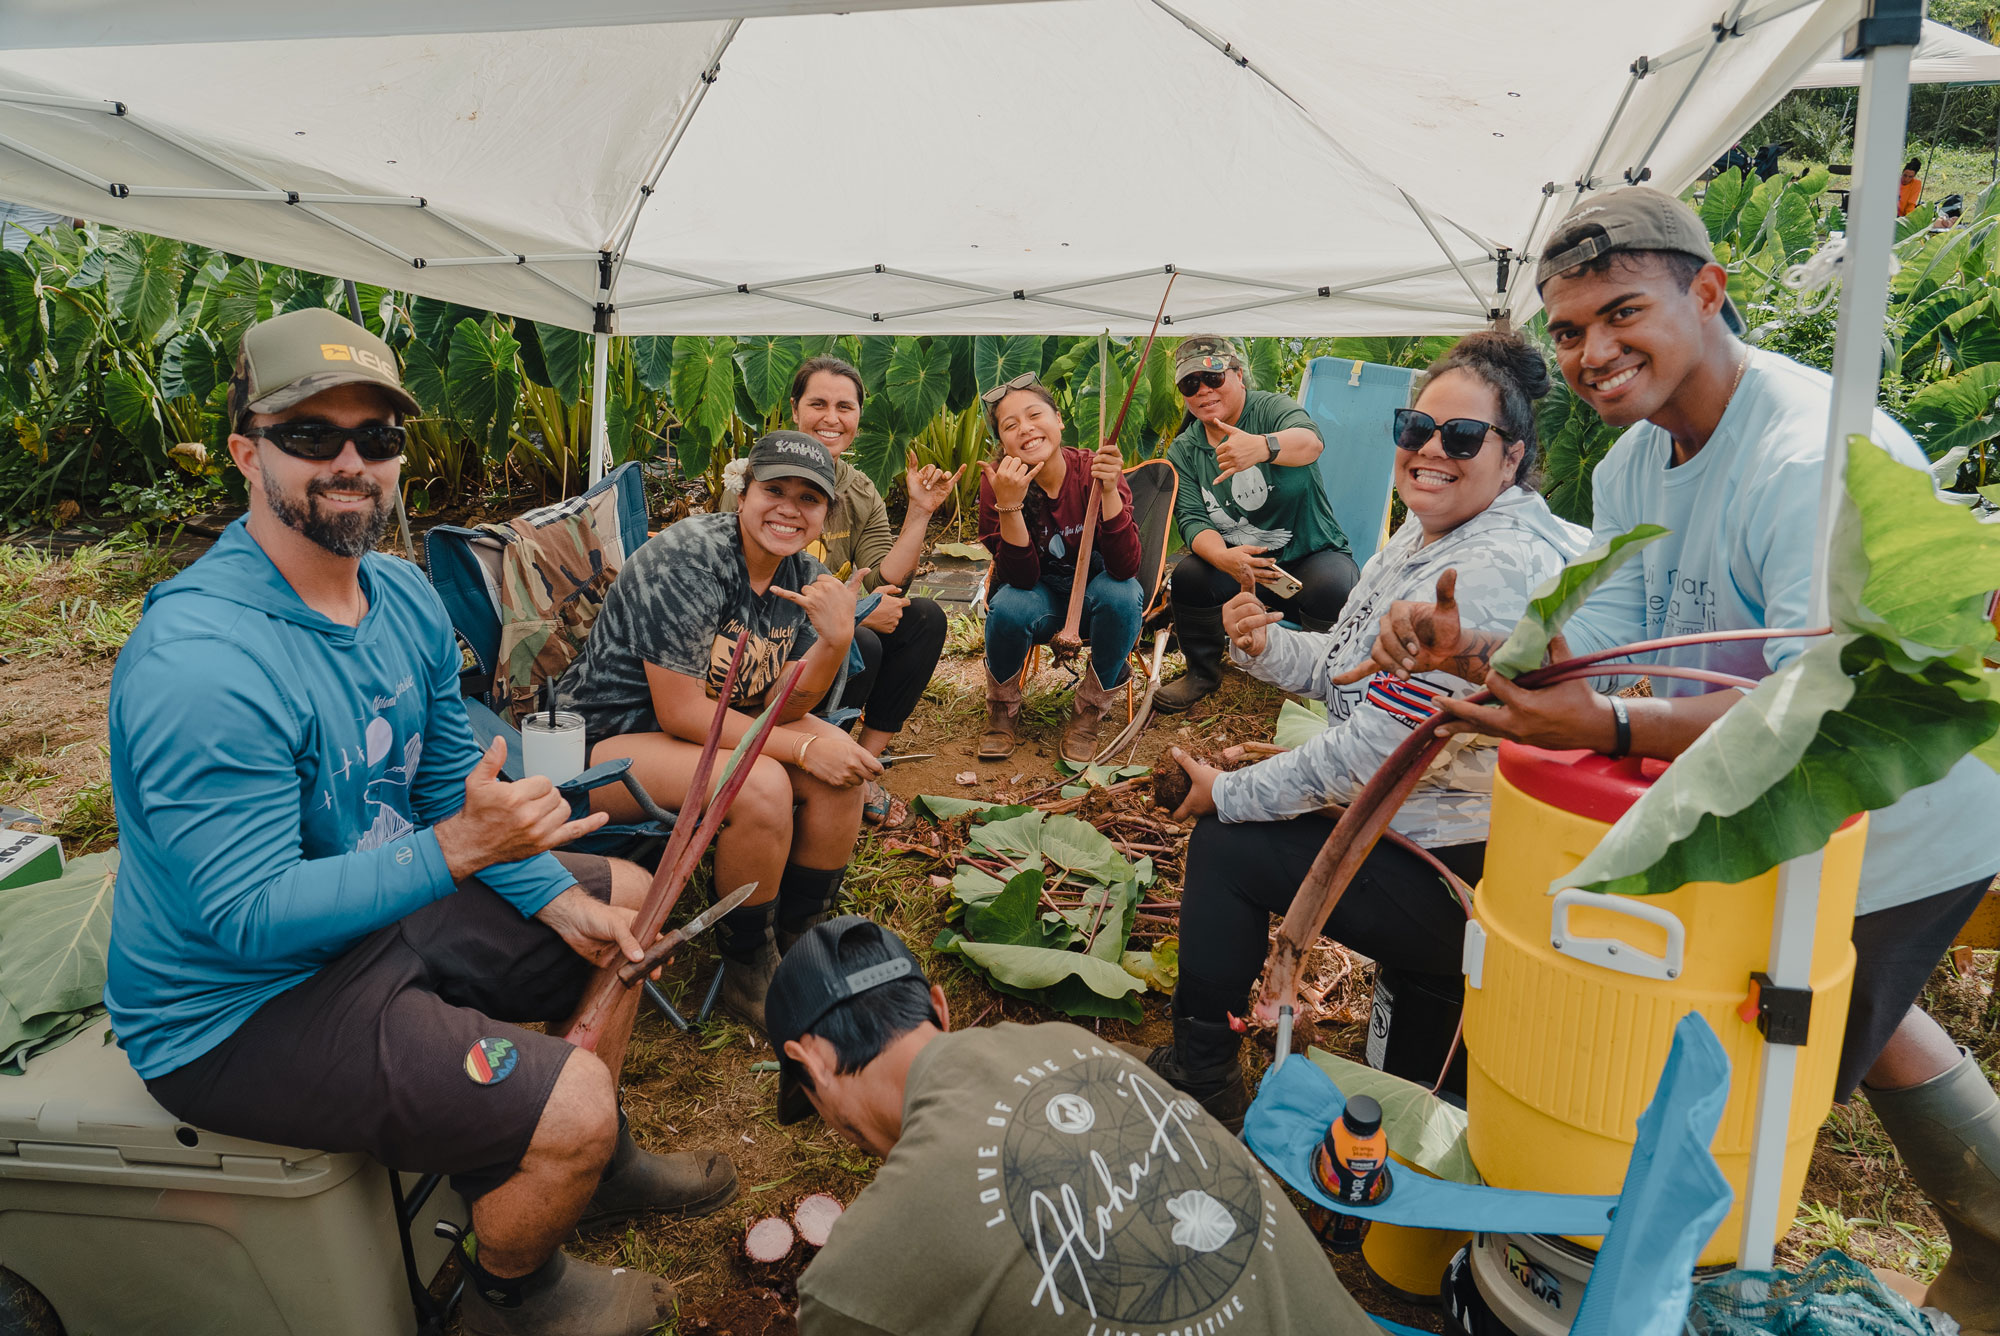 Hawaiian farmers and community members gather to share tubers and planting materials at a La Kalo celebration